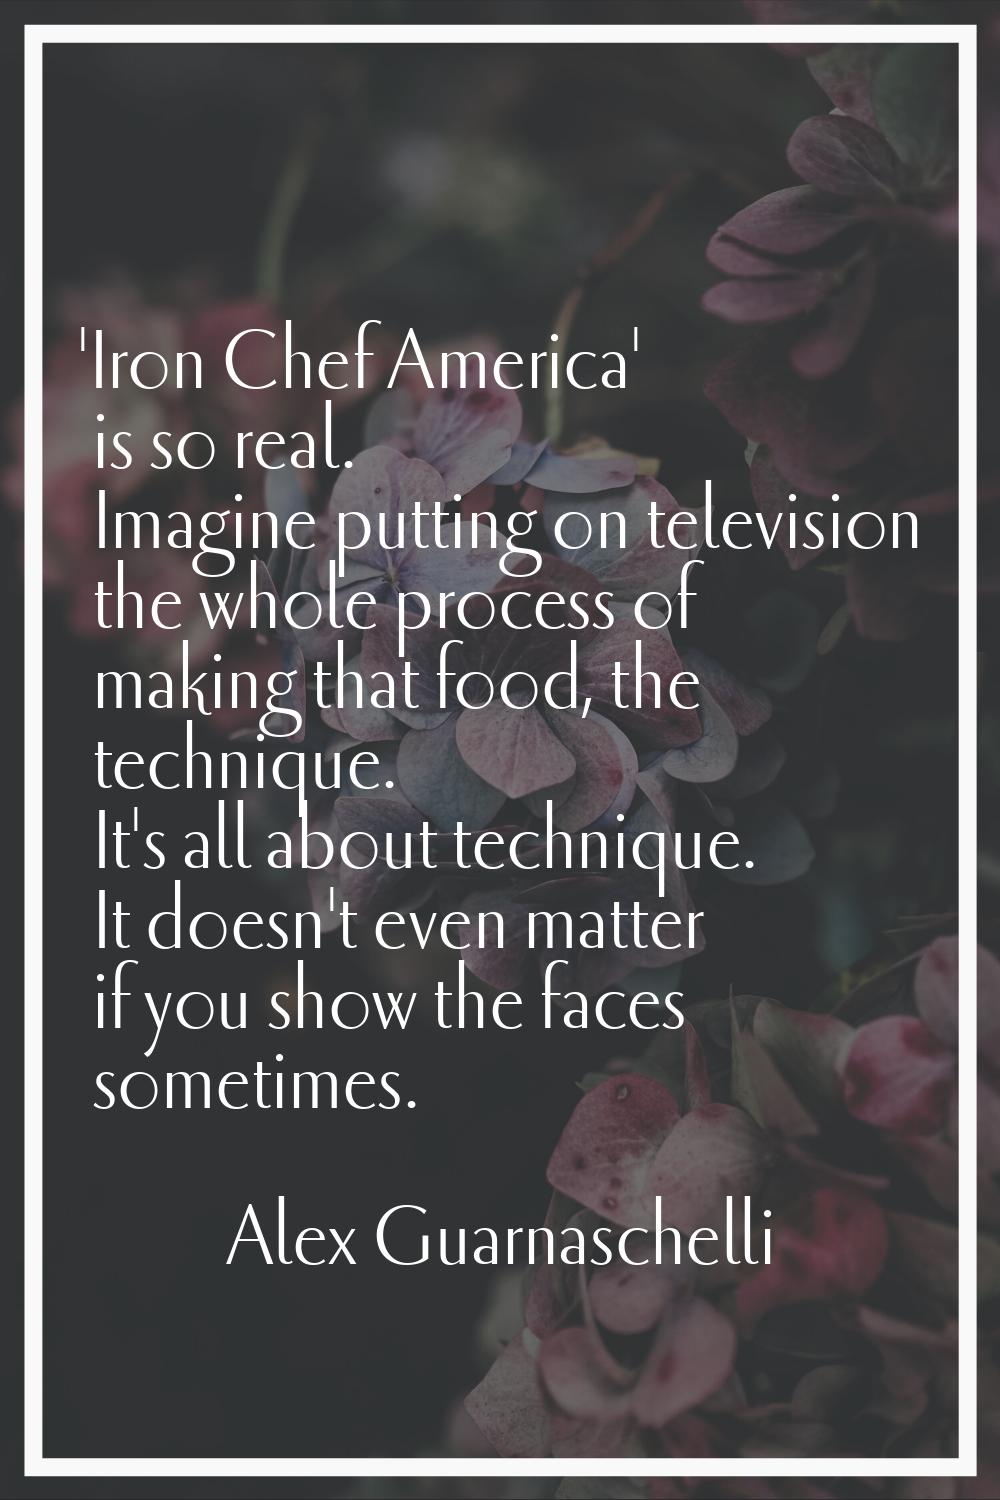 'Iron Chef America' is so real. Imagine putting on television the whole process of making that food